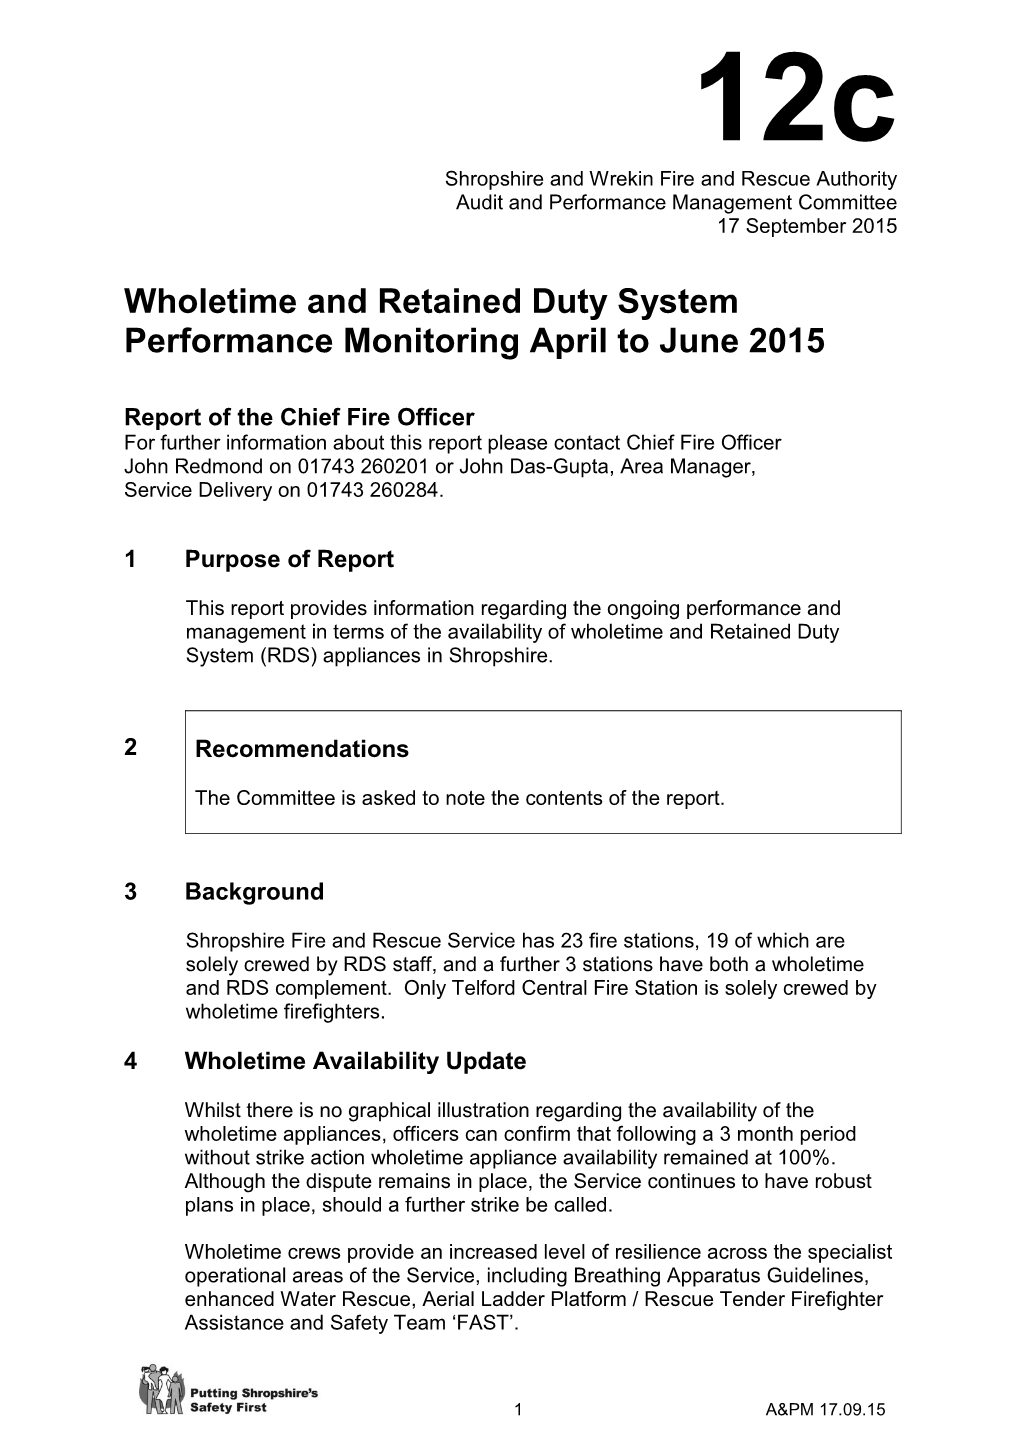 Wholetime and Retained Duty System Performance Monitoring April to June 2015